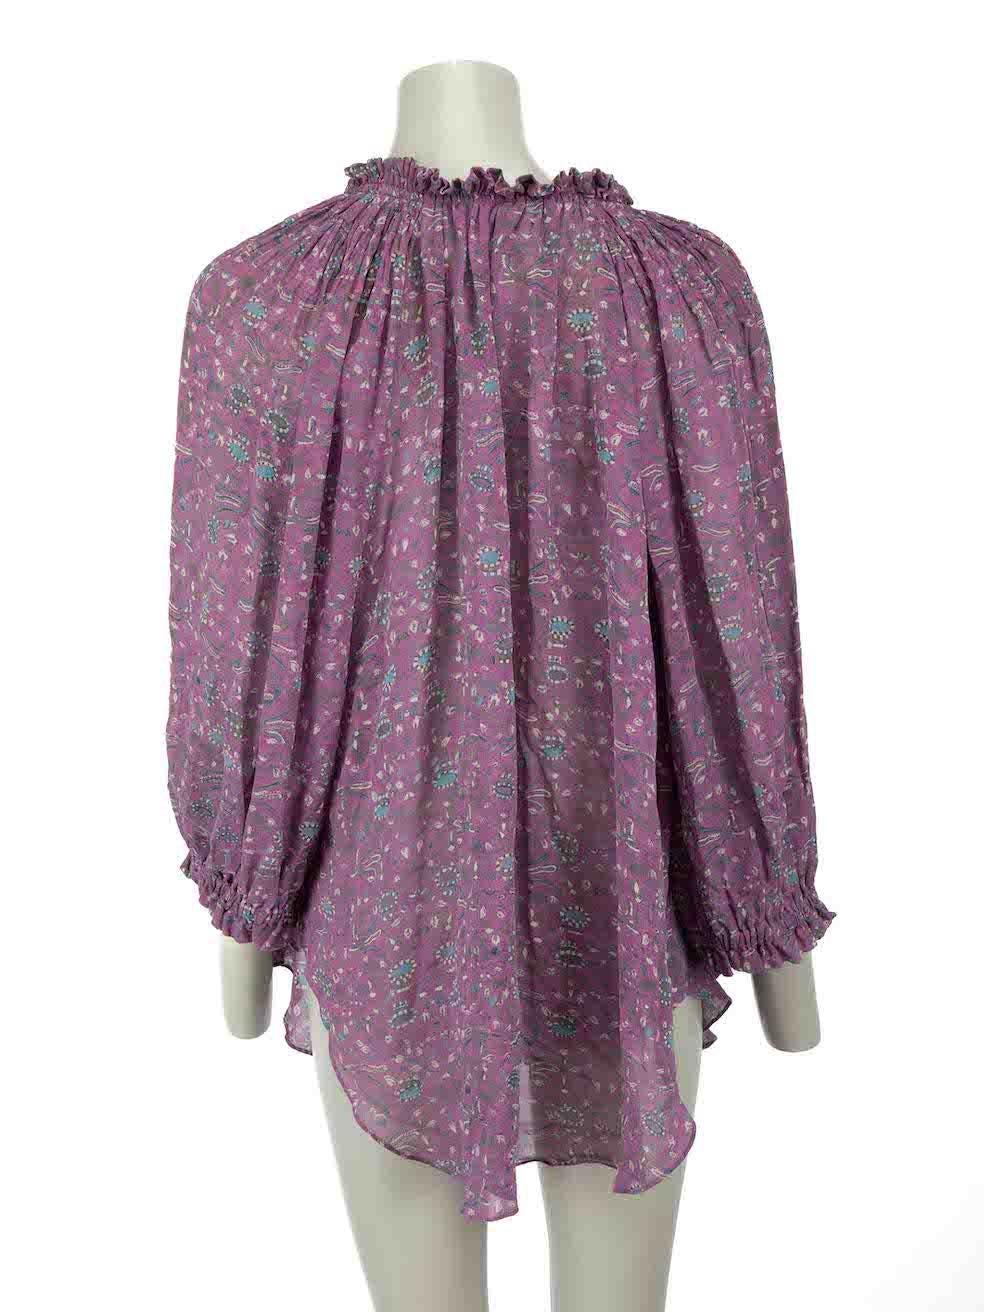 Isabel Marant Isabel Marant Etoile Purple Paisley Print Sheer Blouse Size S In Excellent Condition For Sale In London, GB